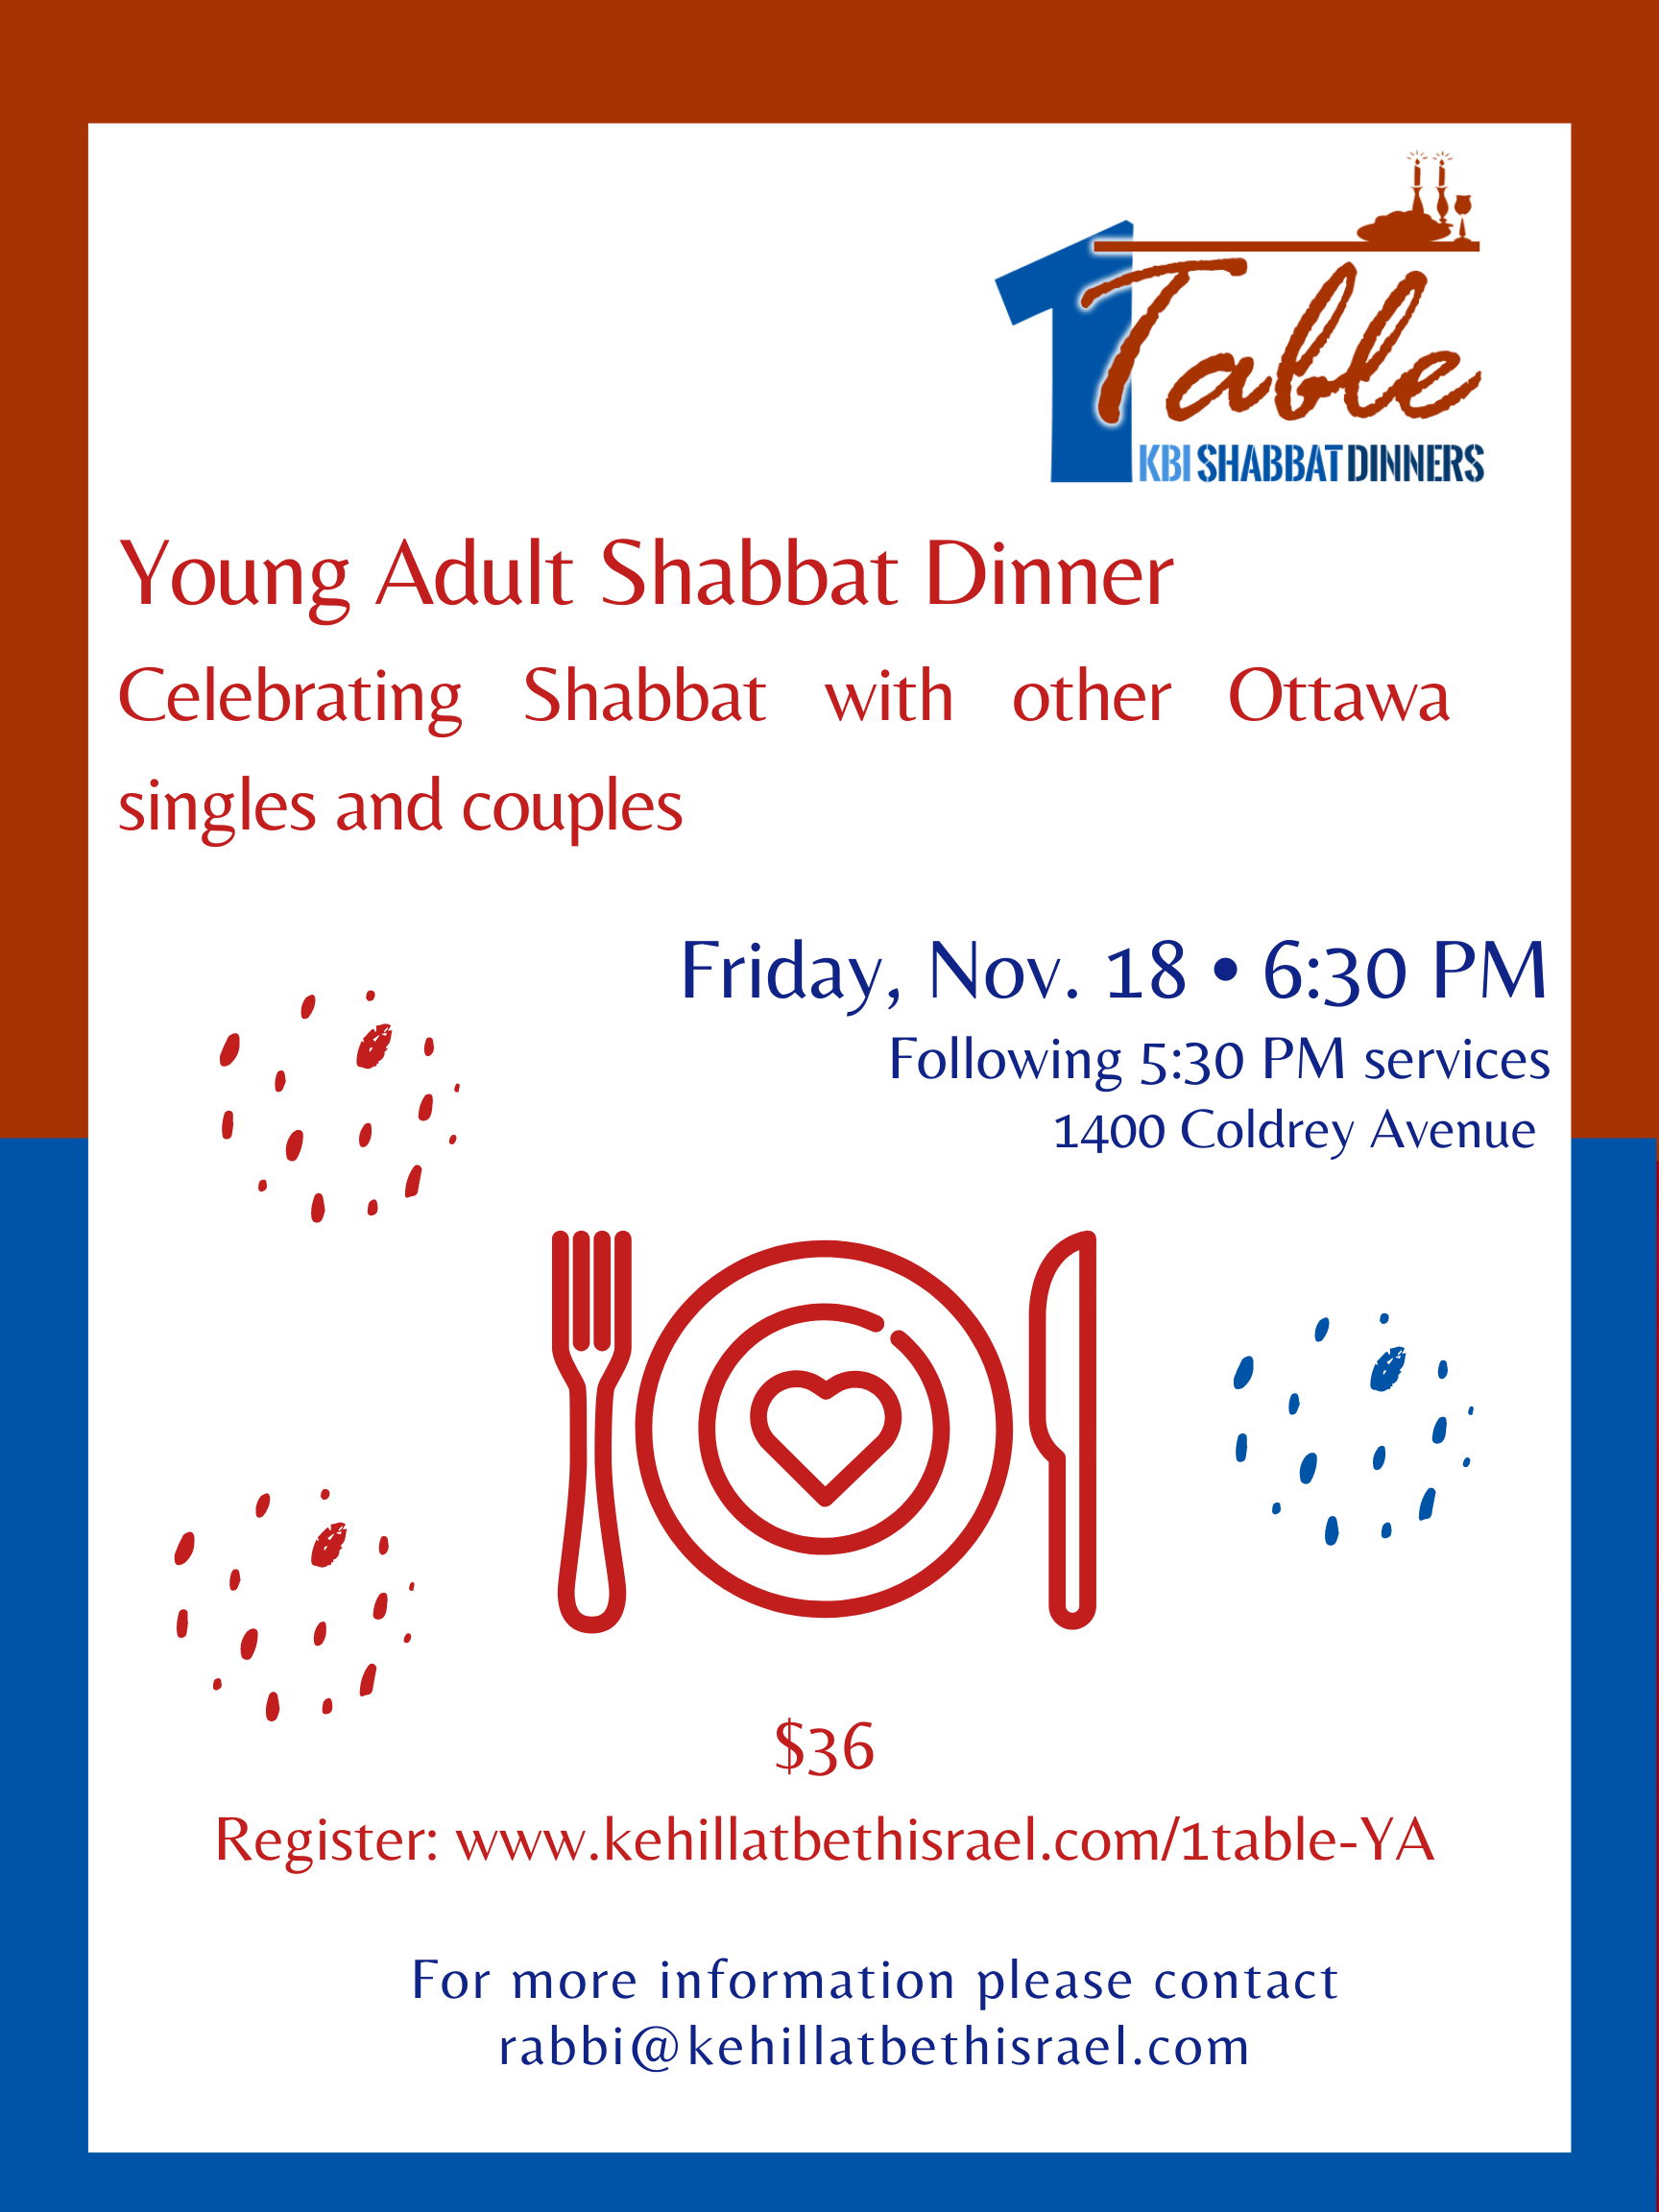 Young Adult 1Table Shabbat Dinner